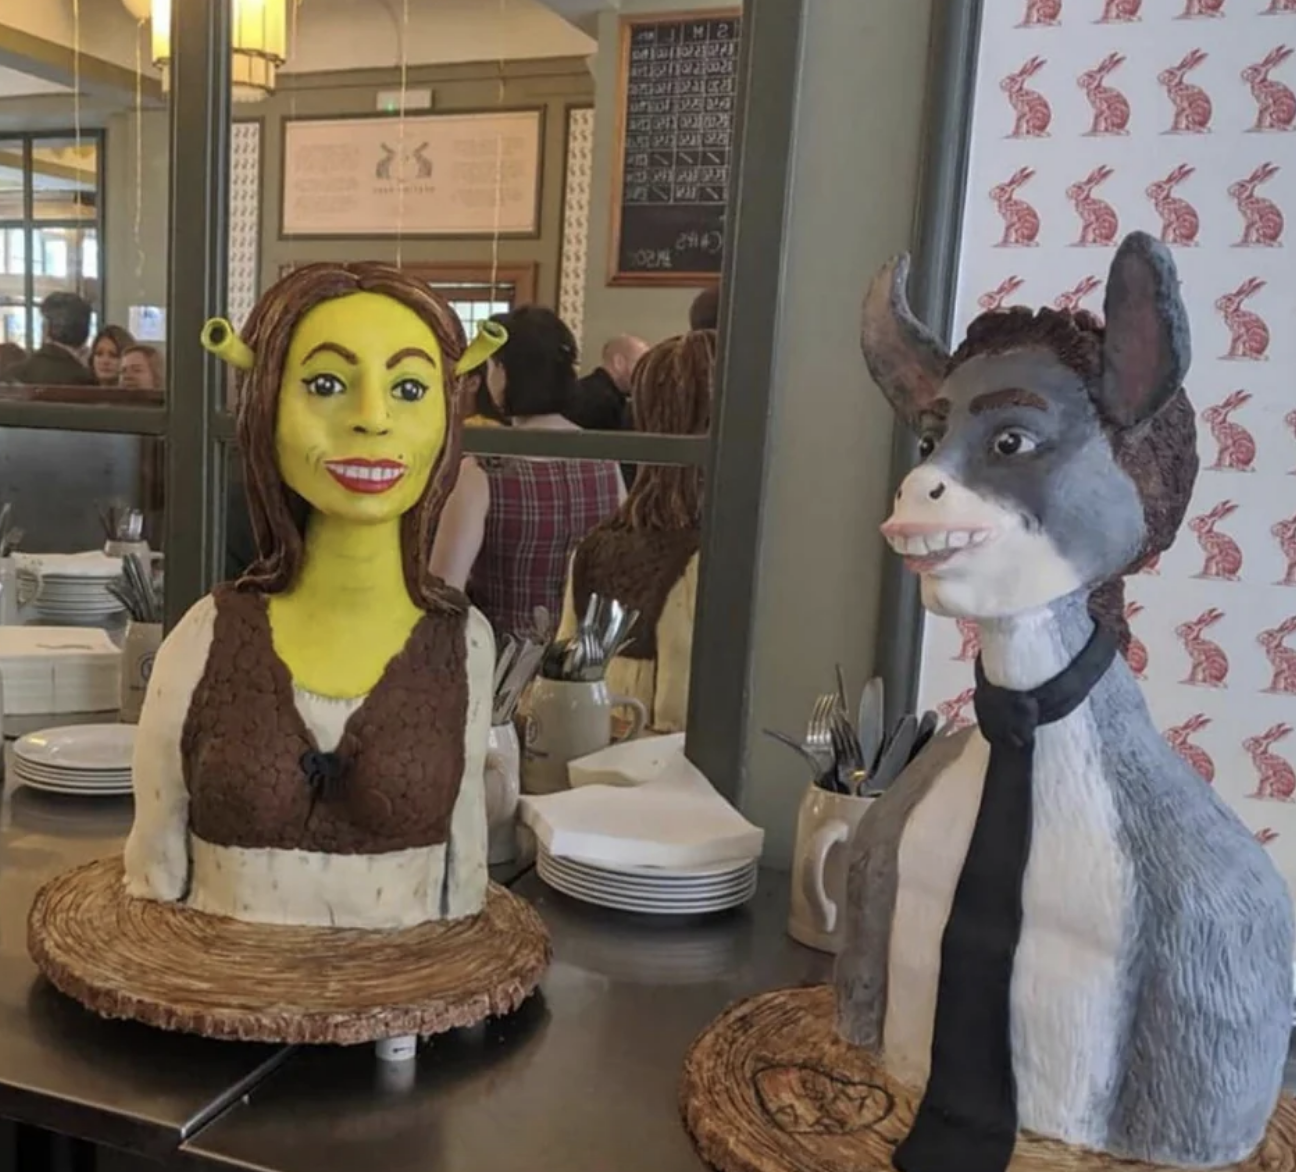 There are two cakes, one intended to look like Fiona from Shrek, the other like Donkey from Shrek; neither actually look like the characters